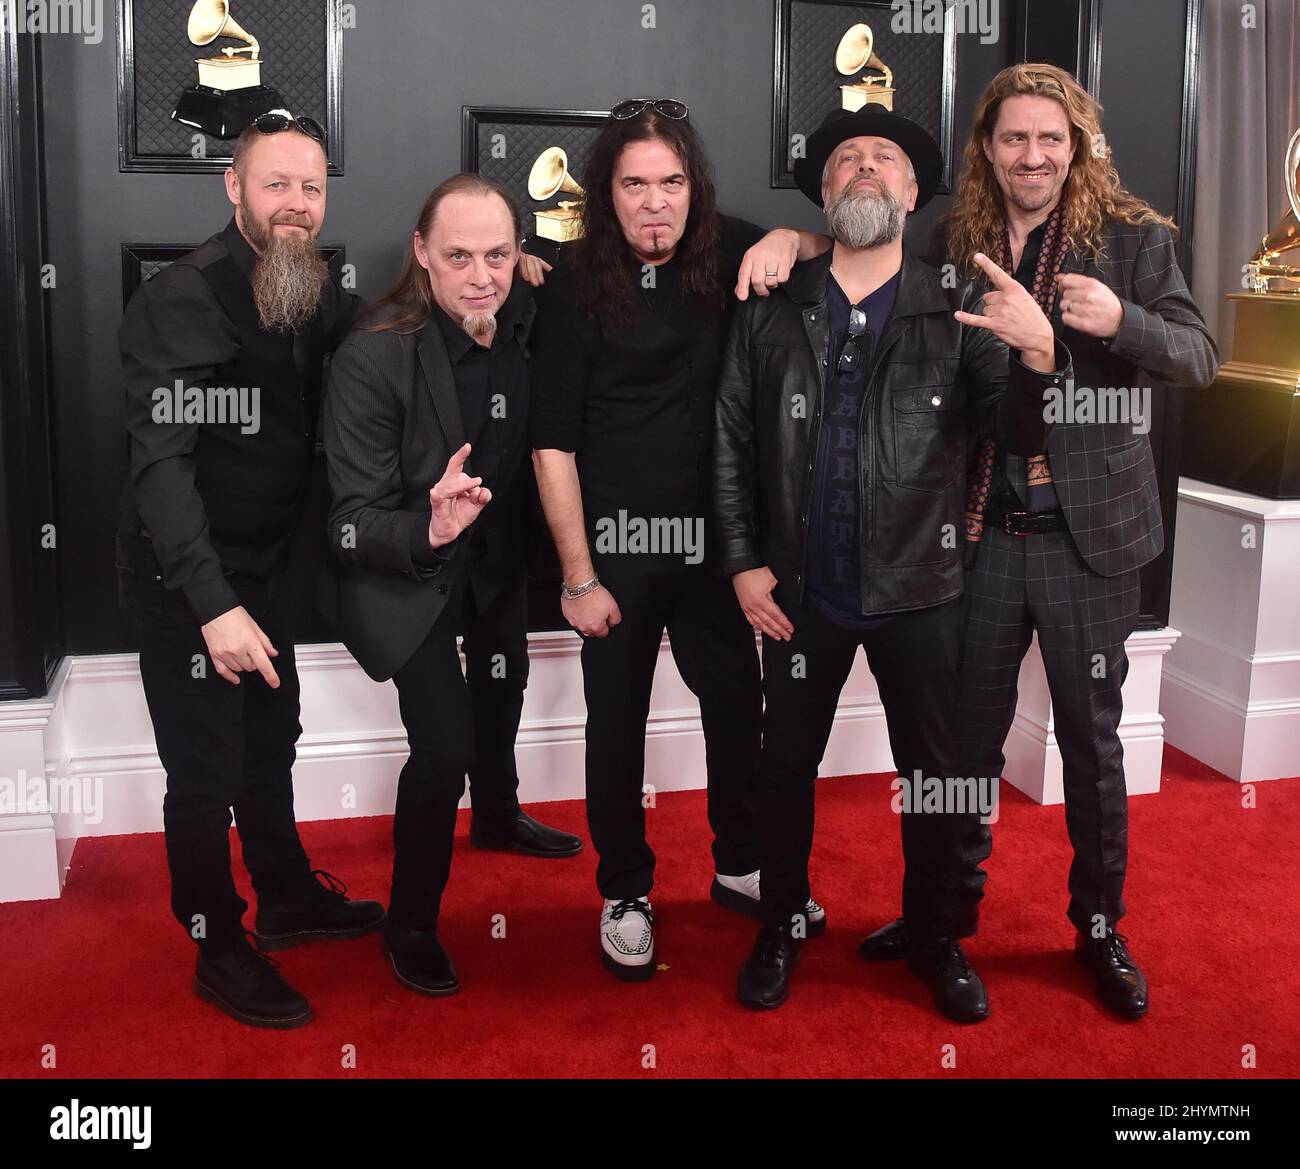 Jan Lindh, Lars Johansson, Leif Edling, Bjorkman, and Johan Langqvist of Candlemass attending the 2020 GRAMMY Awards held at Staples Center in Los Angeles, California. Stock Photo